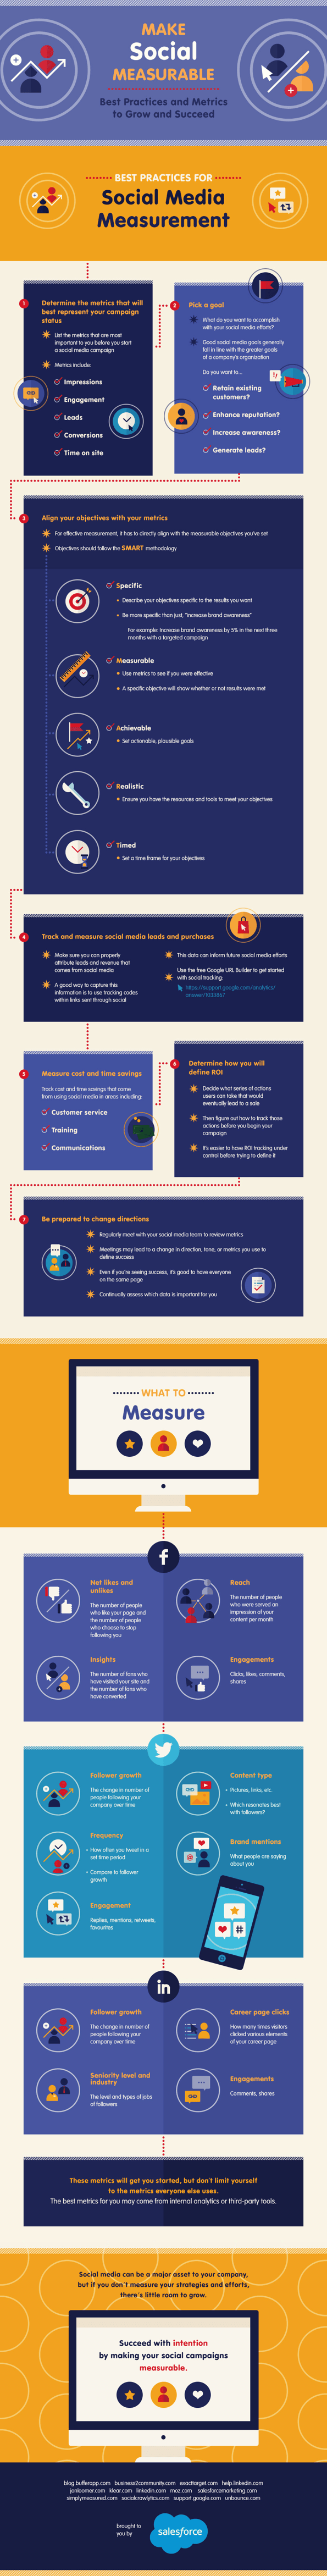 Best Practices for Social Media Measurement Infographic image